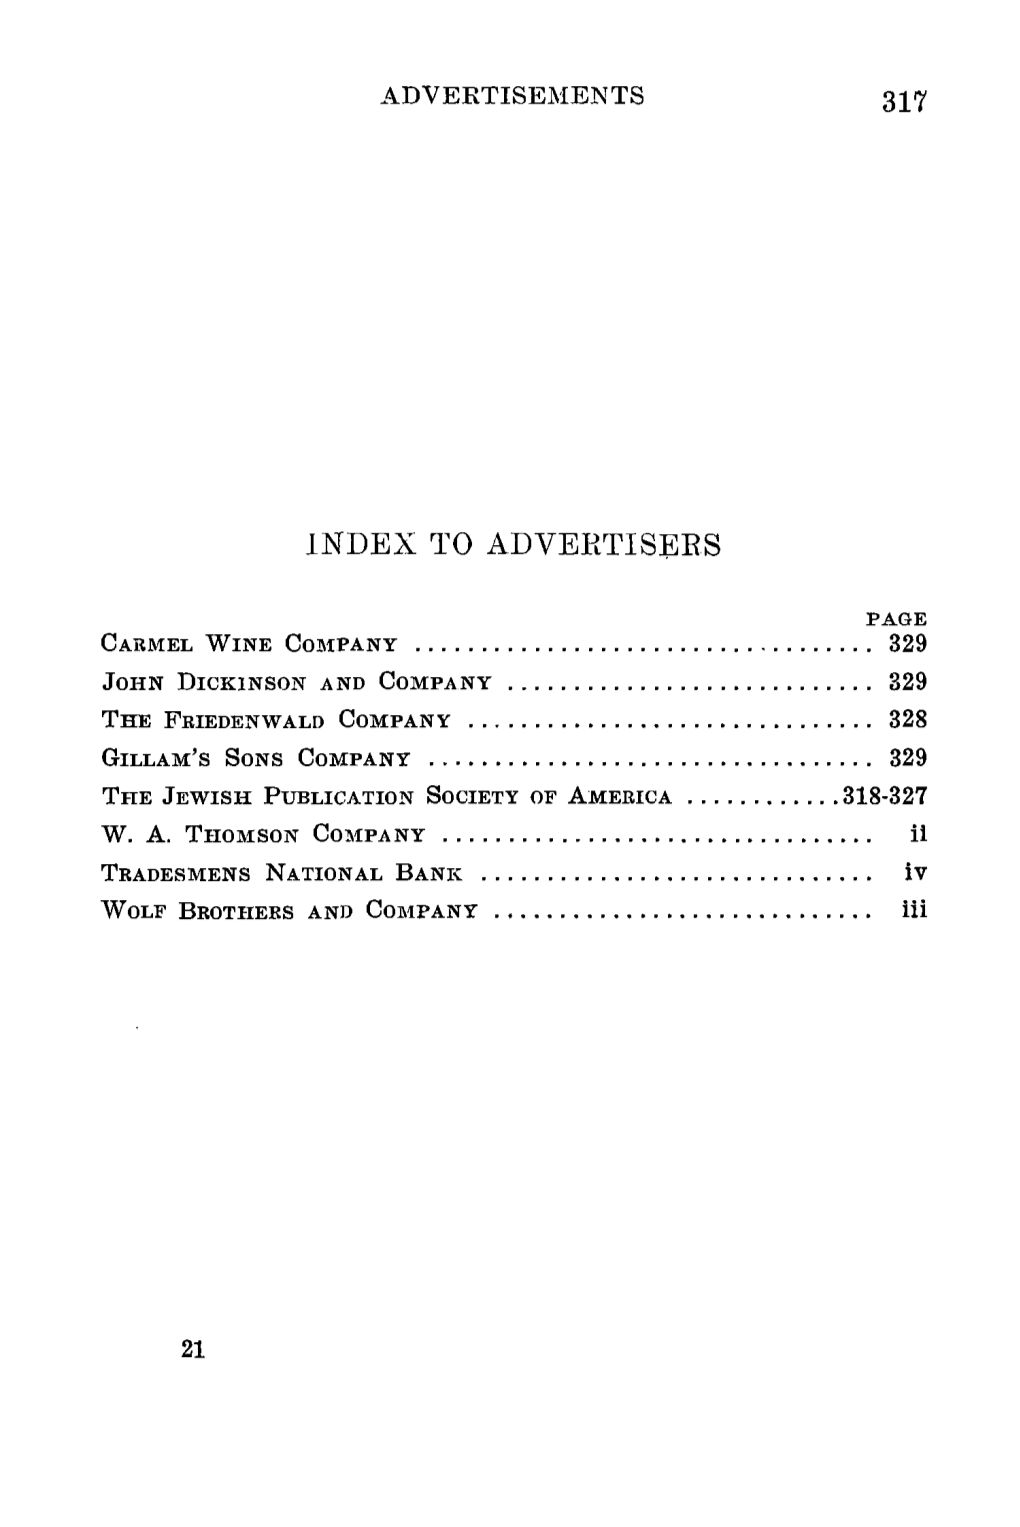 Index to Advertisers (1903-1904)